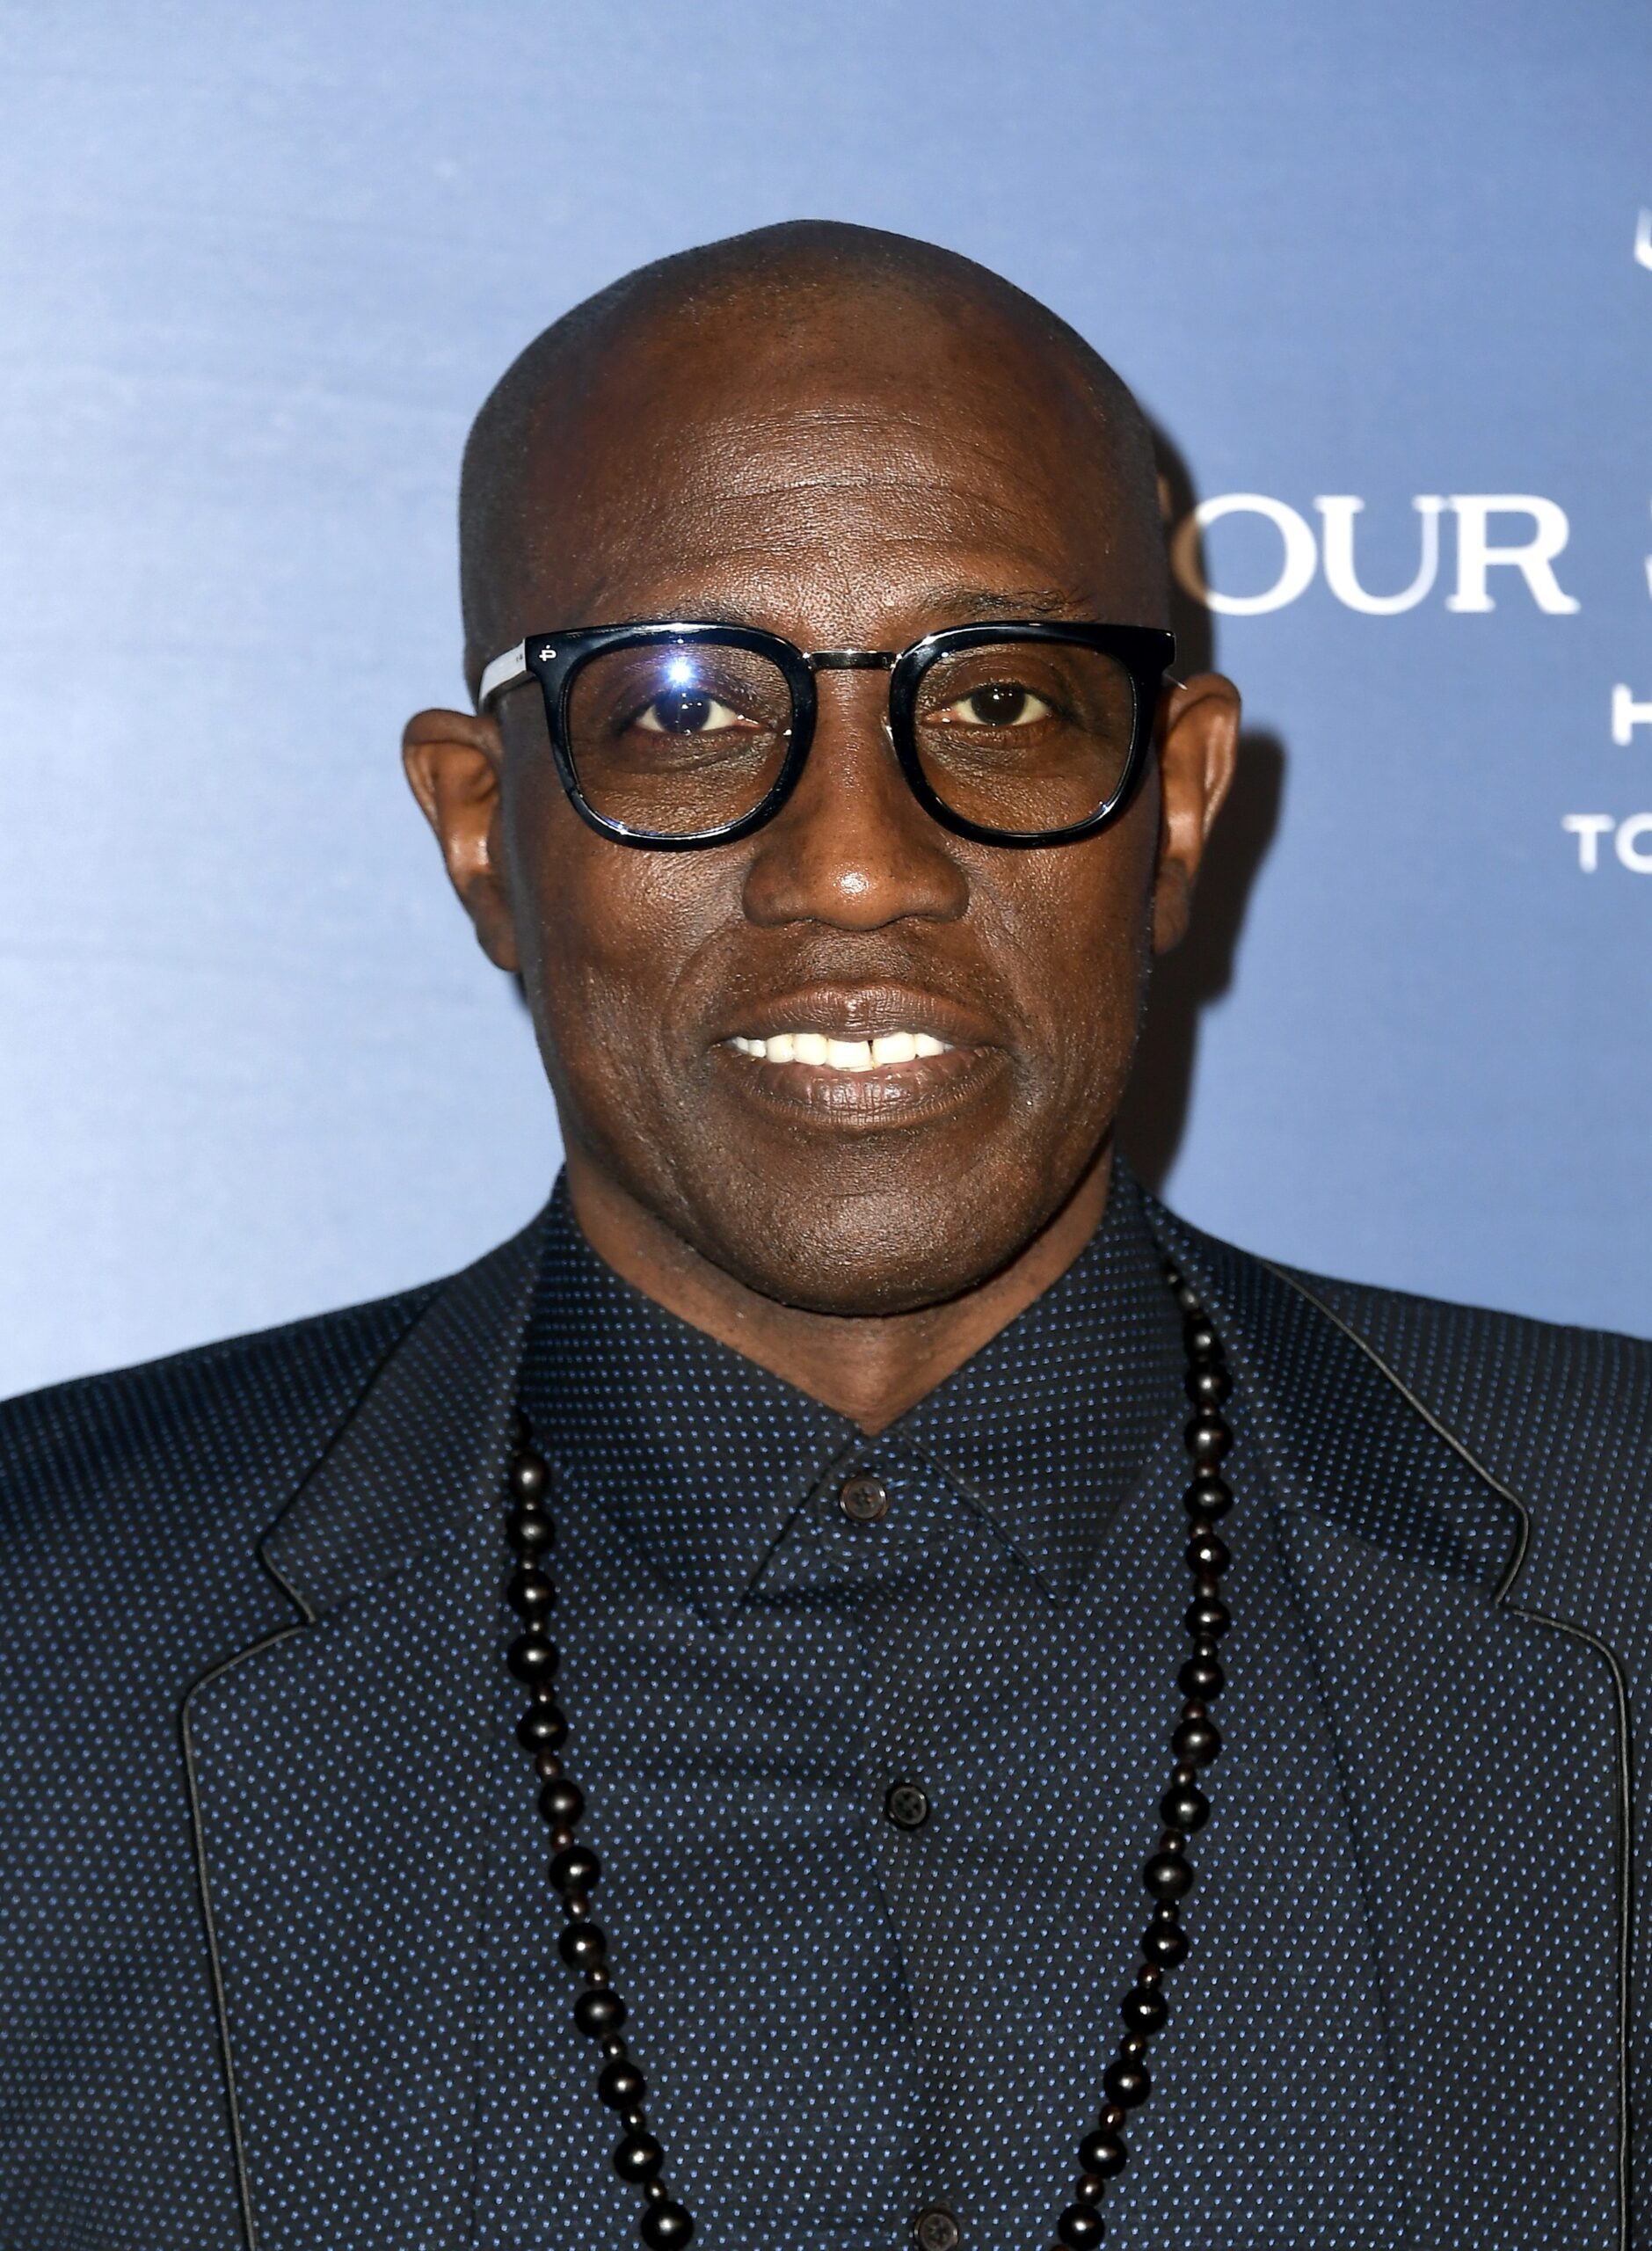 TORONTO, ONTARIO - SEPTEMBER 07: Wesley Snipes attends the HFPA/THR TIFF PARTY during the 2019 Toronto International Film Festival at Four Seasons Hotel on September 07, 2019 in Toronto, Canada. (Photo by Frazer Harrison/Getty Images)